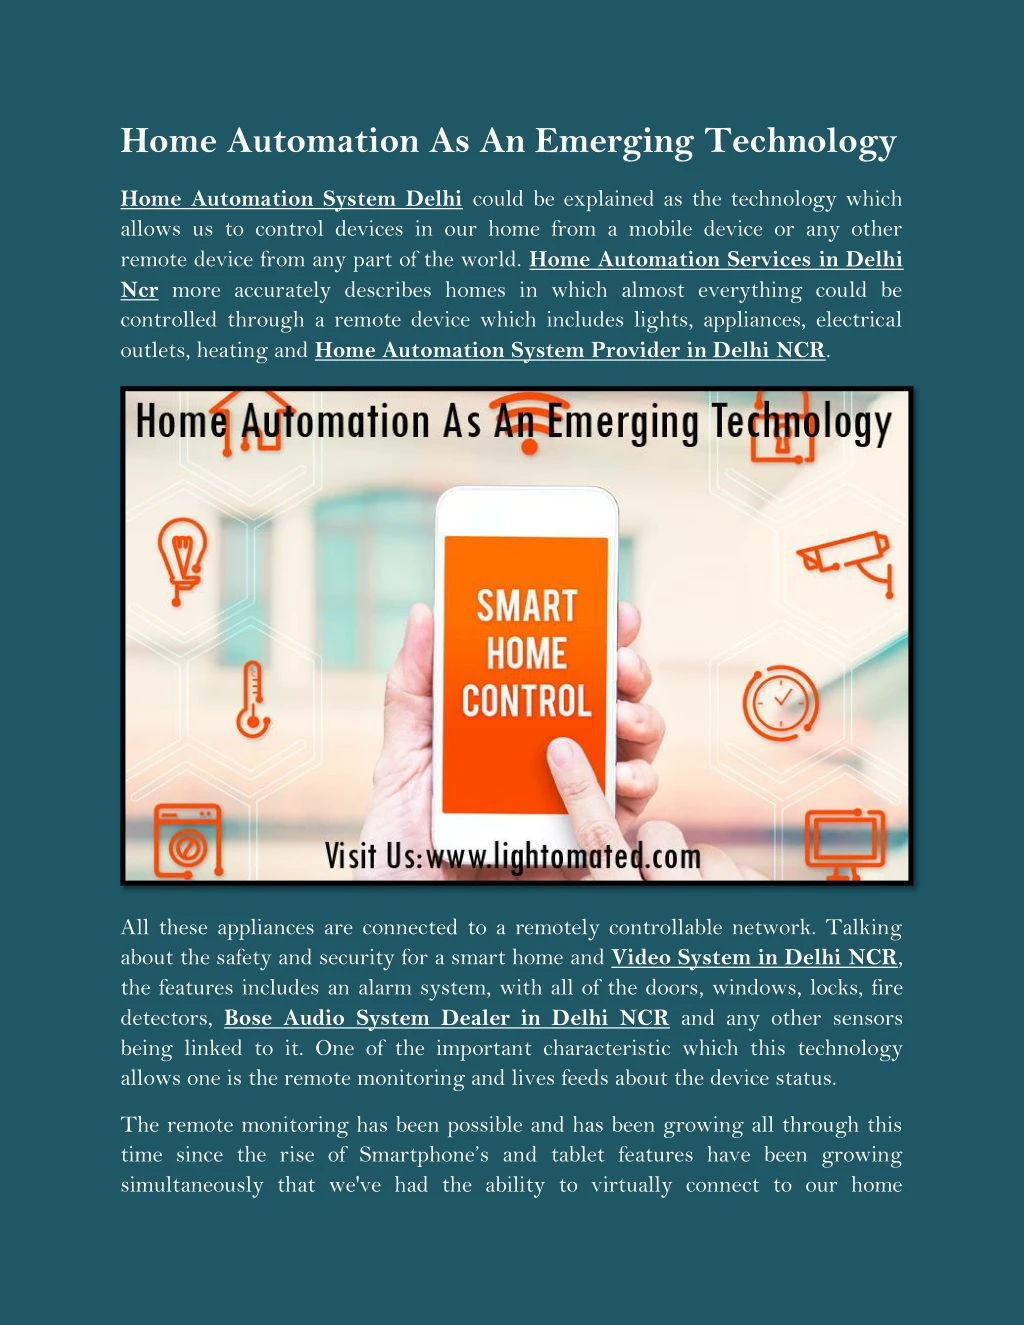 home automation as an emerging technology